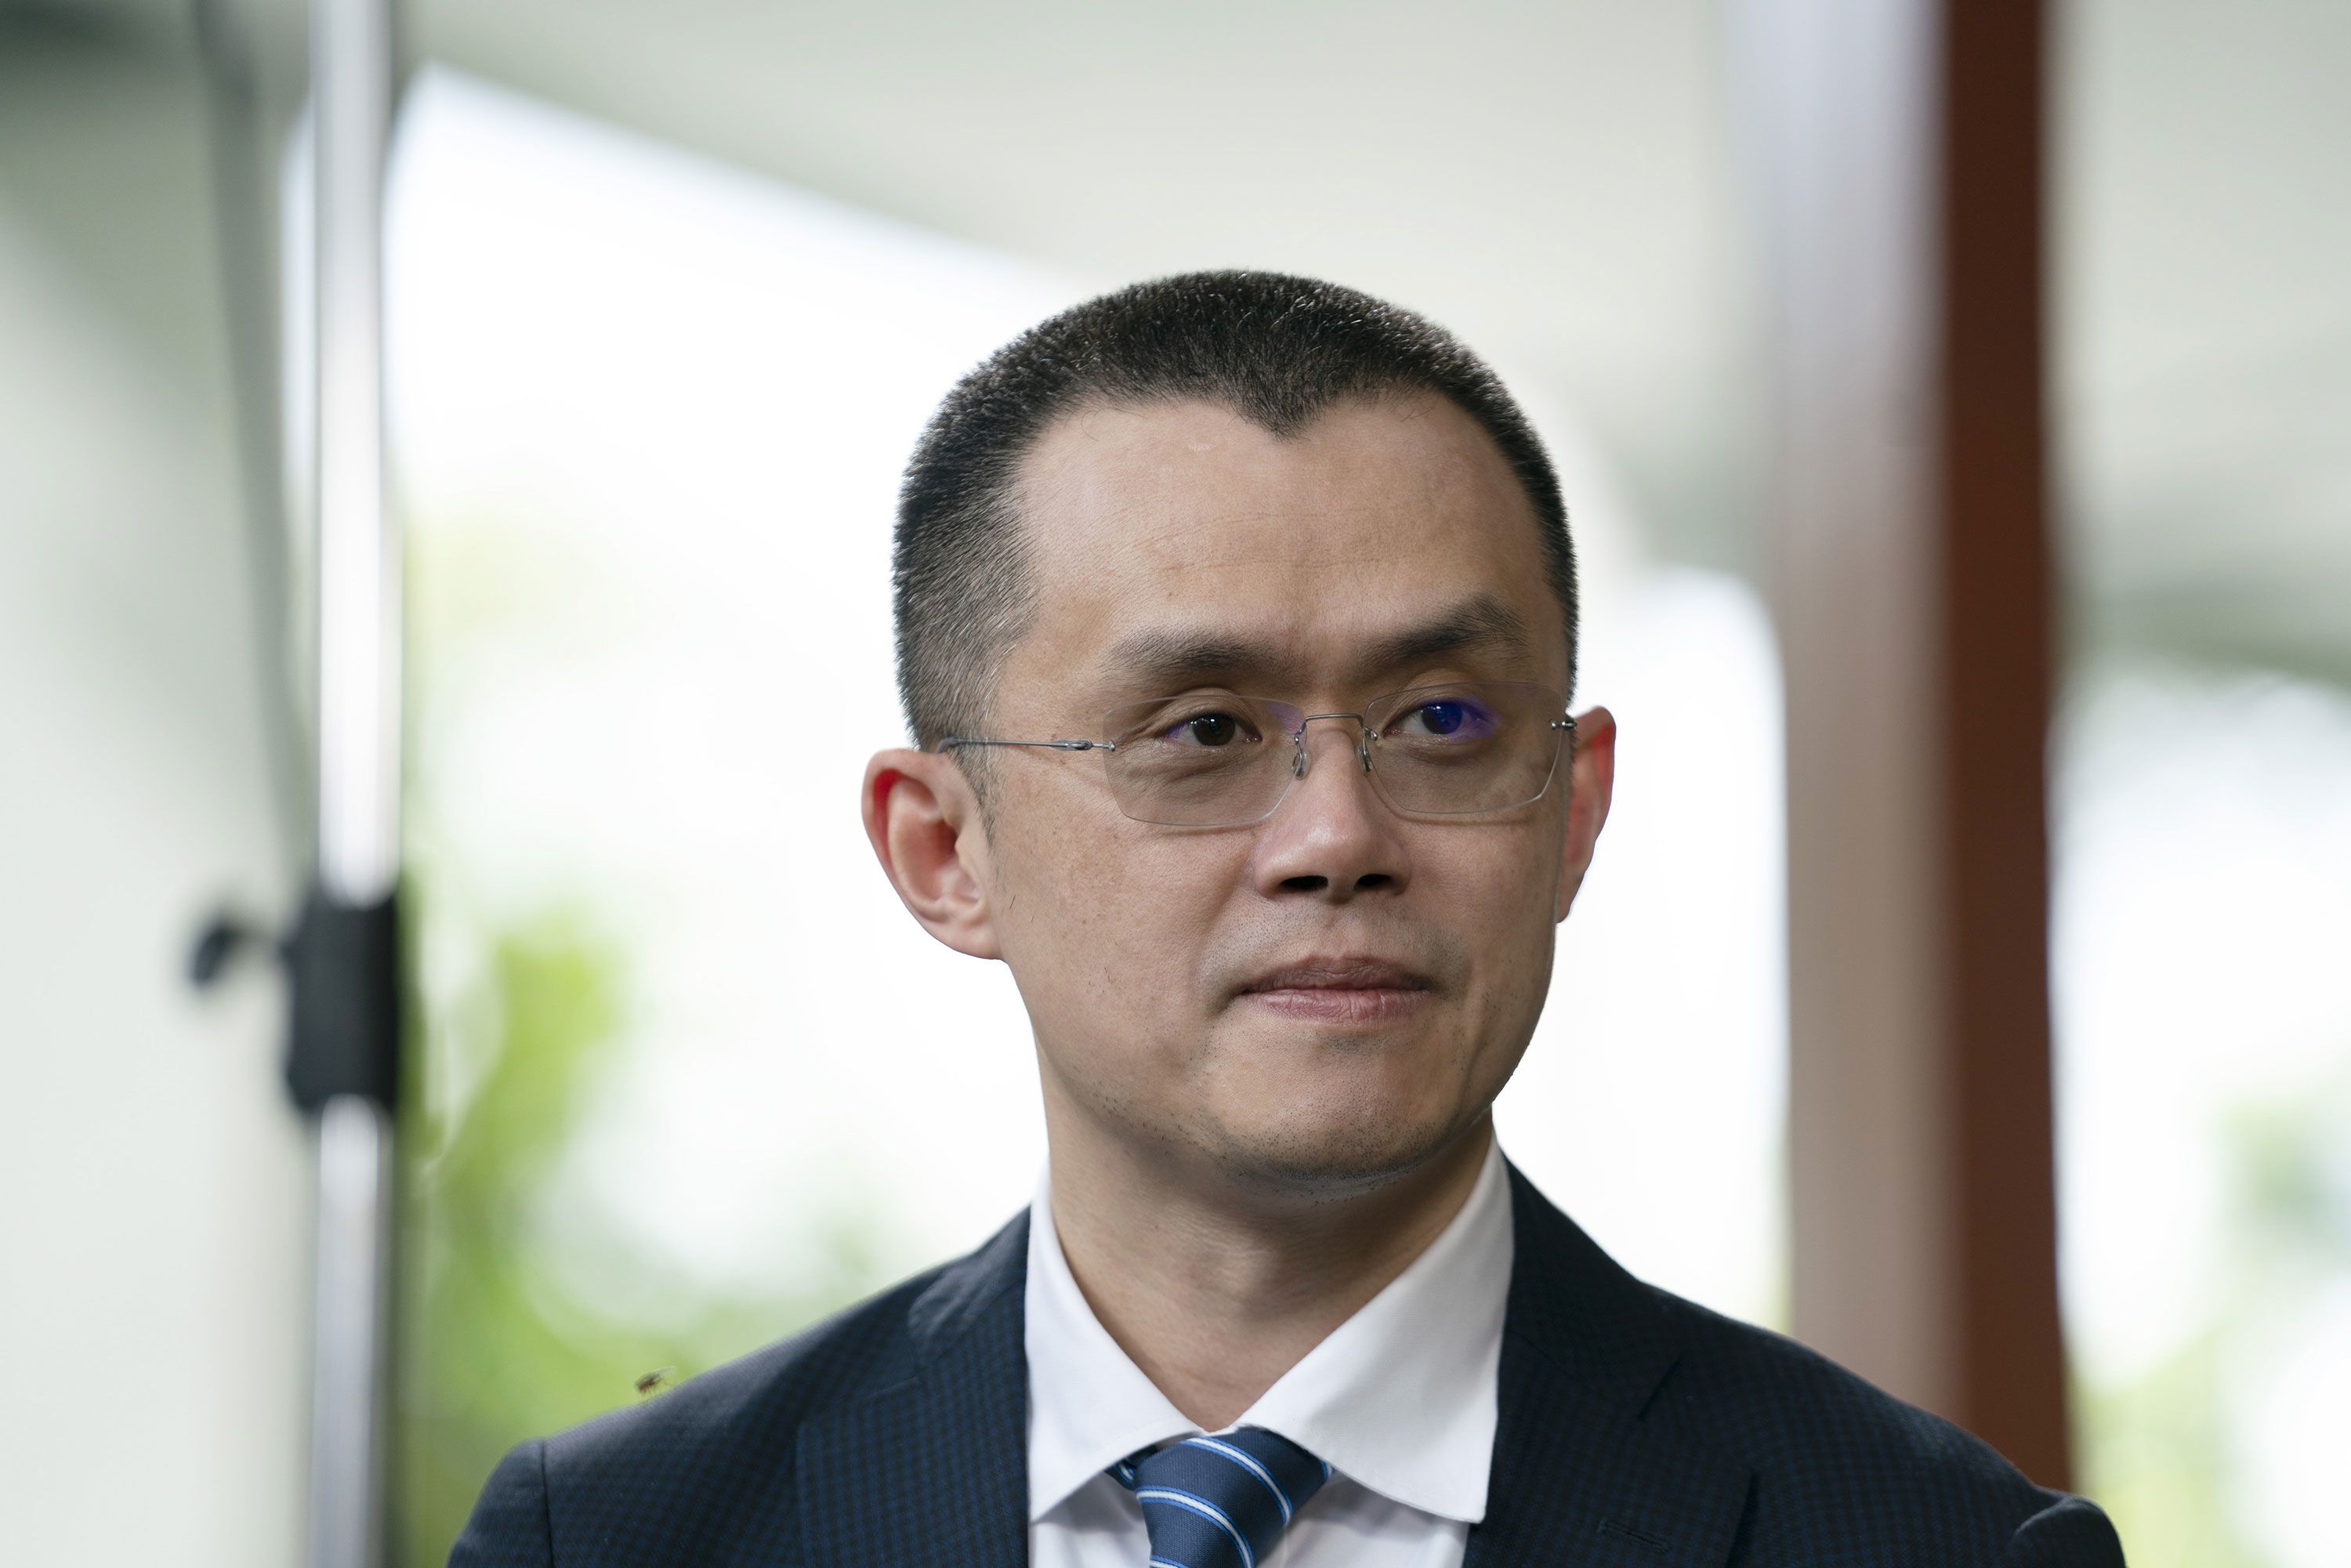 Binance CEO Changpeng Zhao becomes one of the world's richest billionaires, with estimated net worth surpassing Ambani's | CNN Business